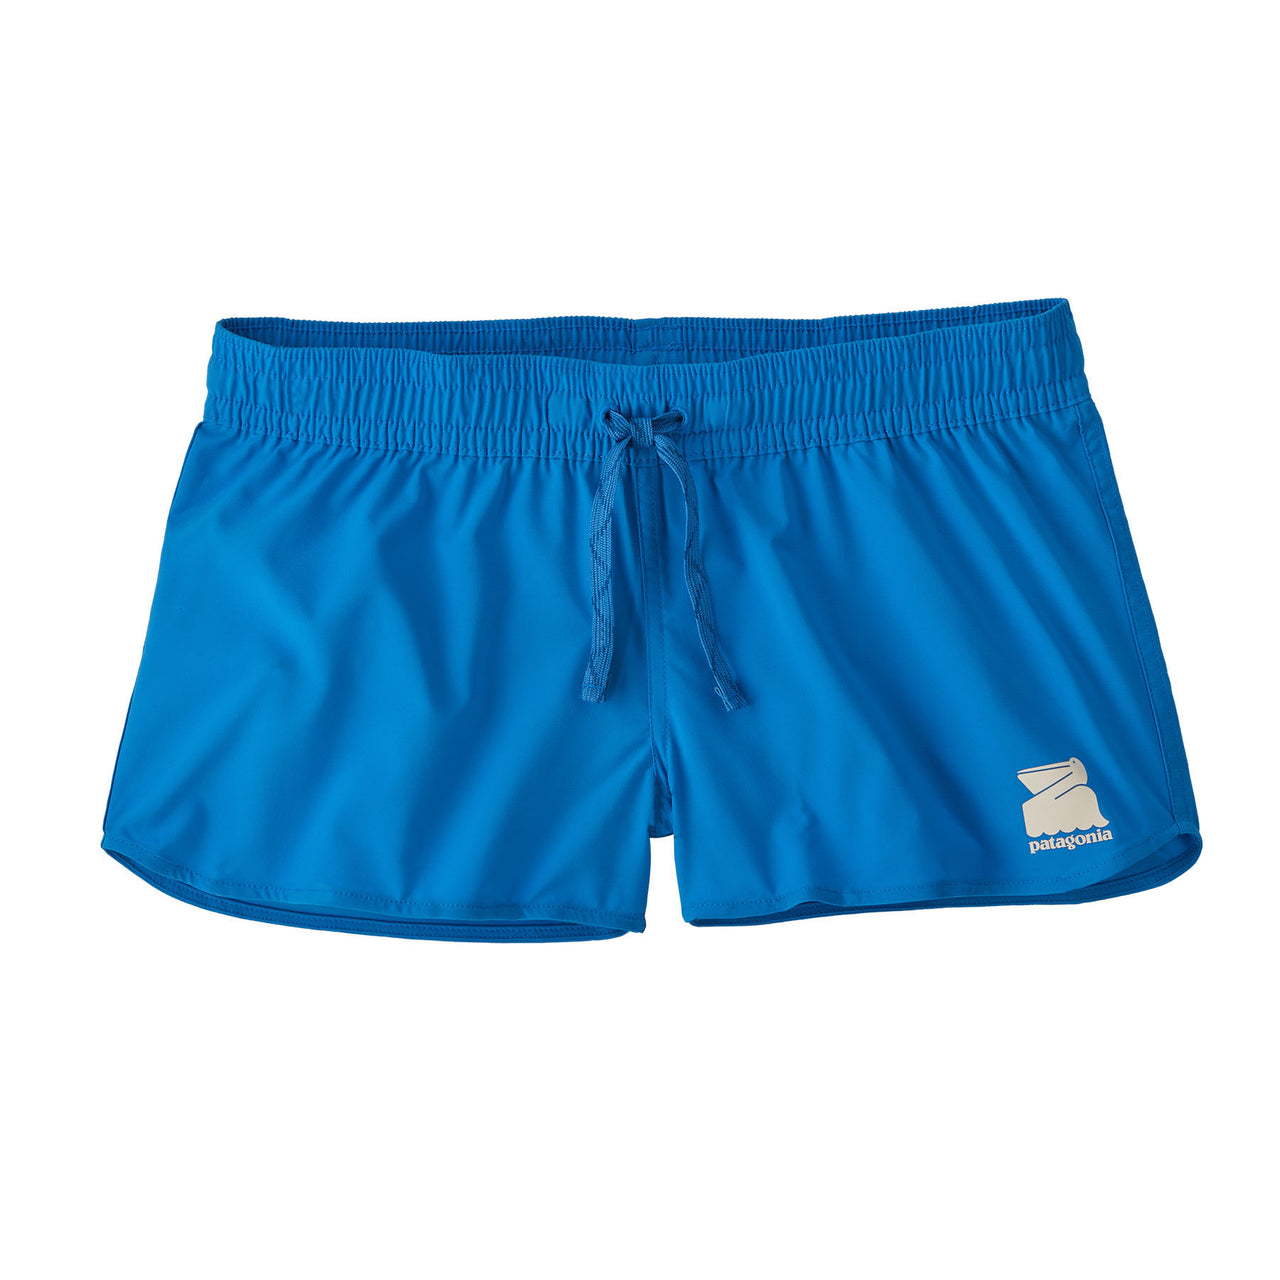 Women's Stretch Planing Micro Shorts - 2"